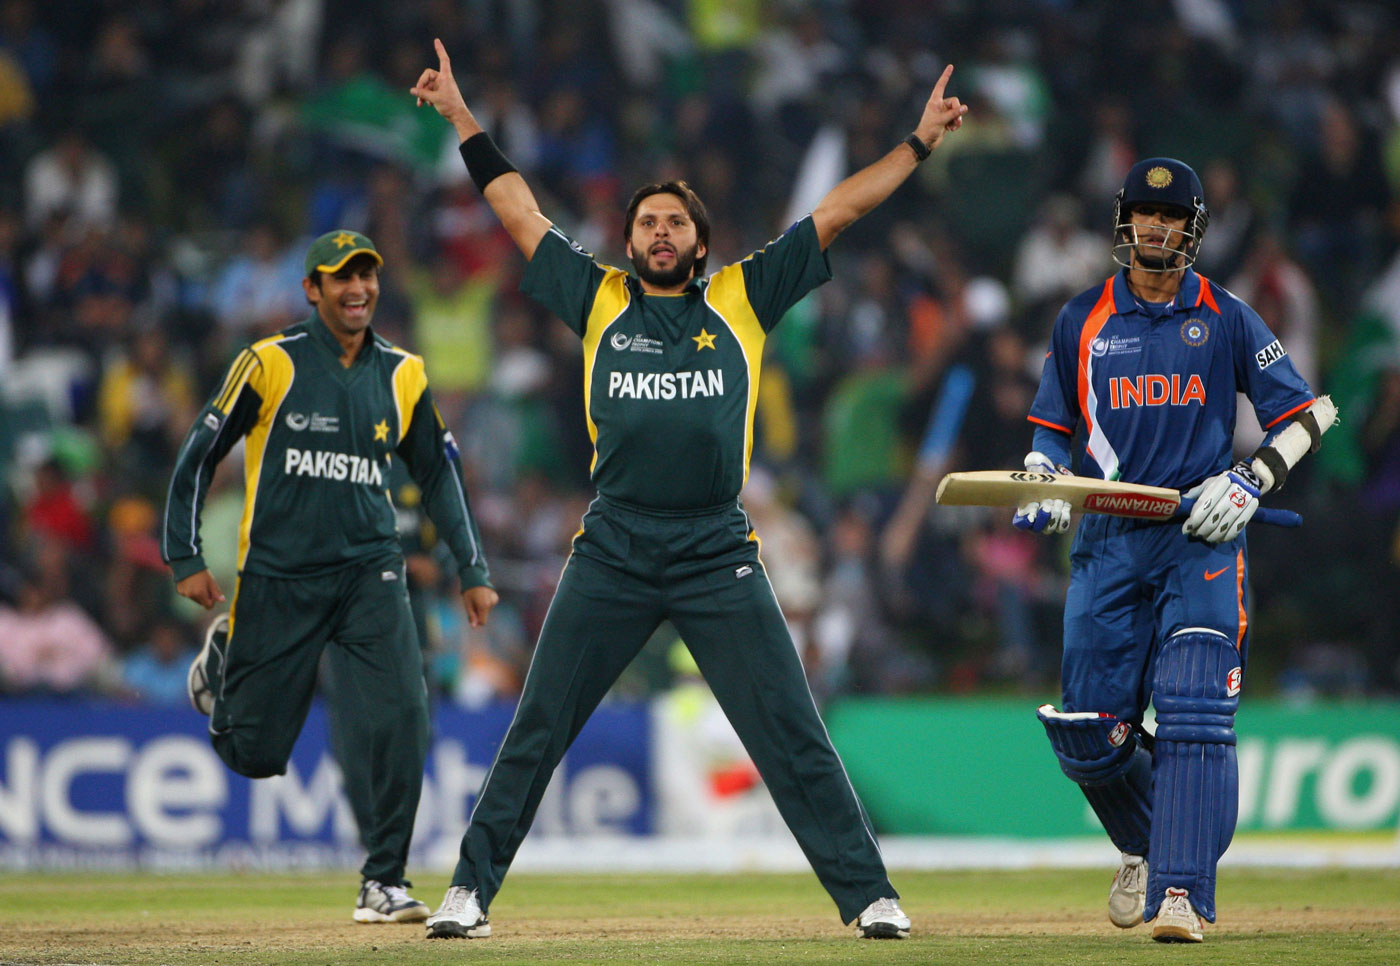 Shahid Afridi celebrating the wicket of MS Dhoni in Champions Trophy 2009 at Centurion, 2009: ICC